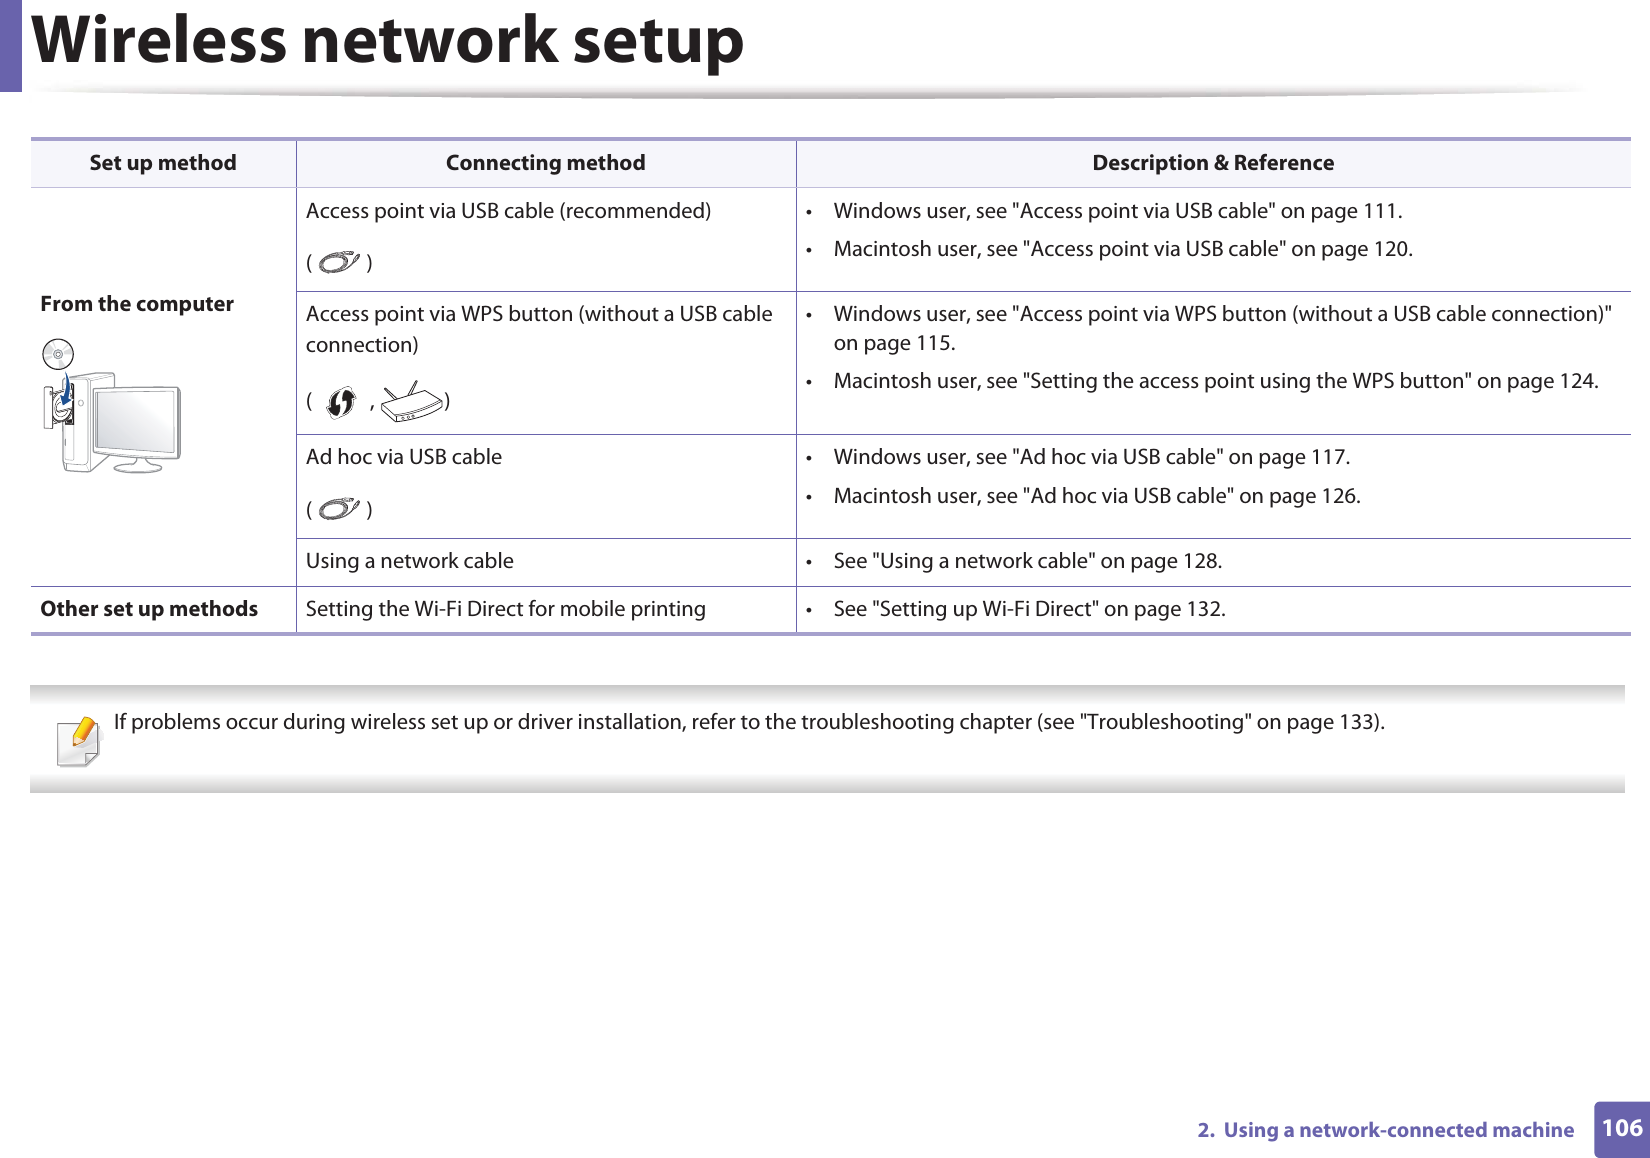 Wireless network setup1062.  Using a network-connected machine  If problems occur during wireless set up or driver installation, refer to the troubleshooting chapter (see &quot;Troubleshooting&quot; on page 133). From the computerAccess point via USB cable (recommended)()• Windows user, see &quot;Access point via USB cable&quot; on page 111.• Macintosh user, see &quot;Access point via USB cable&quot; on page 120.Access point via WPS button (without a USB cable connection)( ,  )• Windows user, see &quot;Access point via WPS button (without a USB cable connection)&quot; on page 115.• Macintosh user, see &quot;Setting the access point using the WPS button&quot; on page 124.Ad hoc via USB cable()• Windows user, see &quot;Ad hoc via USB cable&quot; on page 117.• Macintosh user, see &quot;Ad hoc via USB cable&quot; on page 126.Using a network cable • See &quot;Using a network cable&quot; on page 128.Other set up methods Setting the Wi-Fi Direct for mobile printing • See &quot;Setting up Wi-Fi Direct&quot; on page 132.Set up method Connecting method Description &amp; Reference